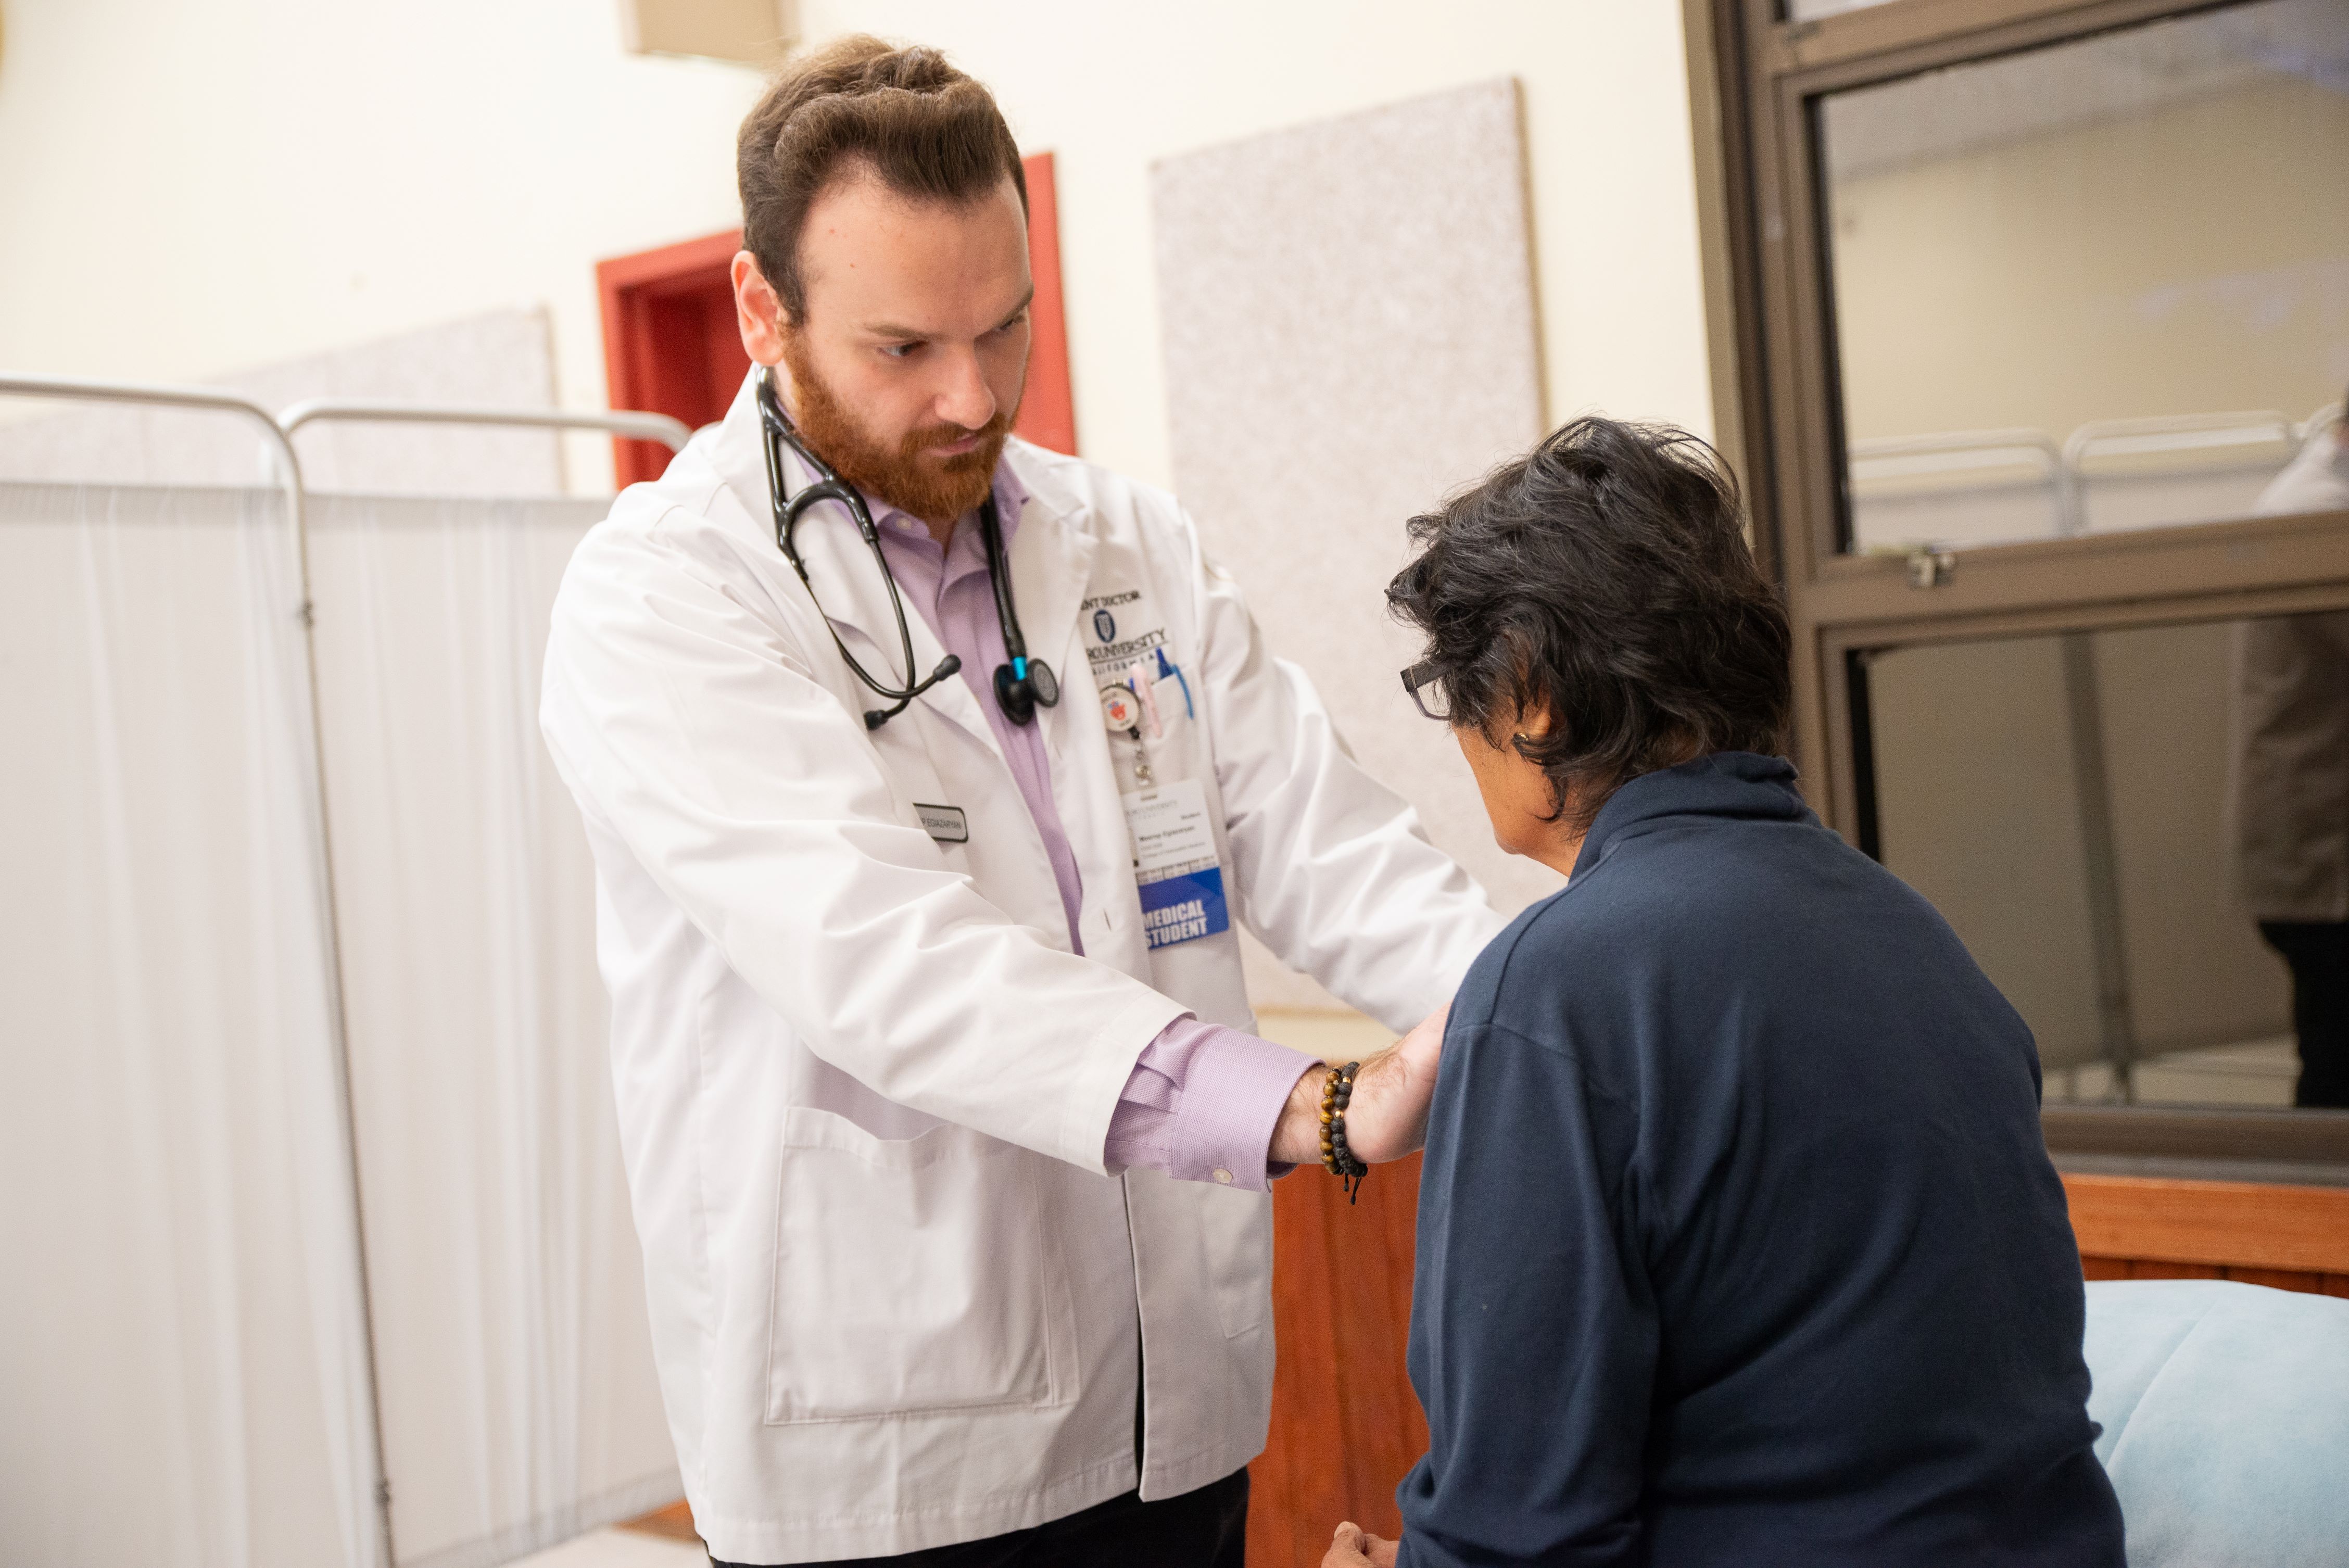 Student clinician helping a patient with a health screening